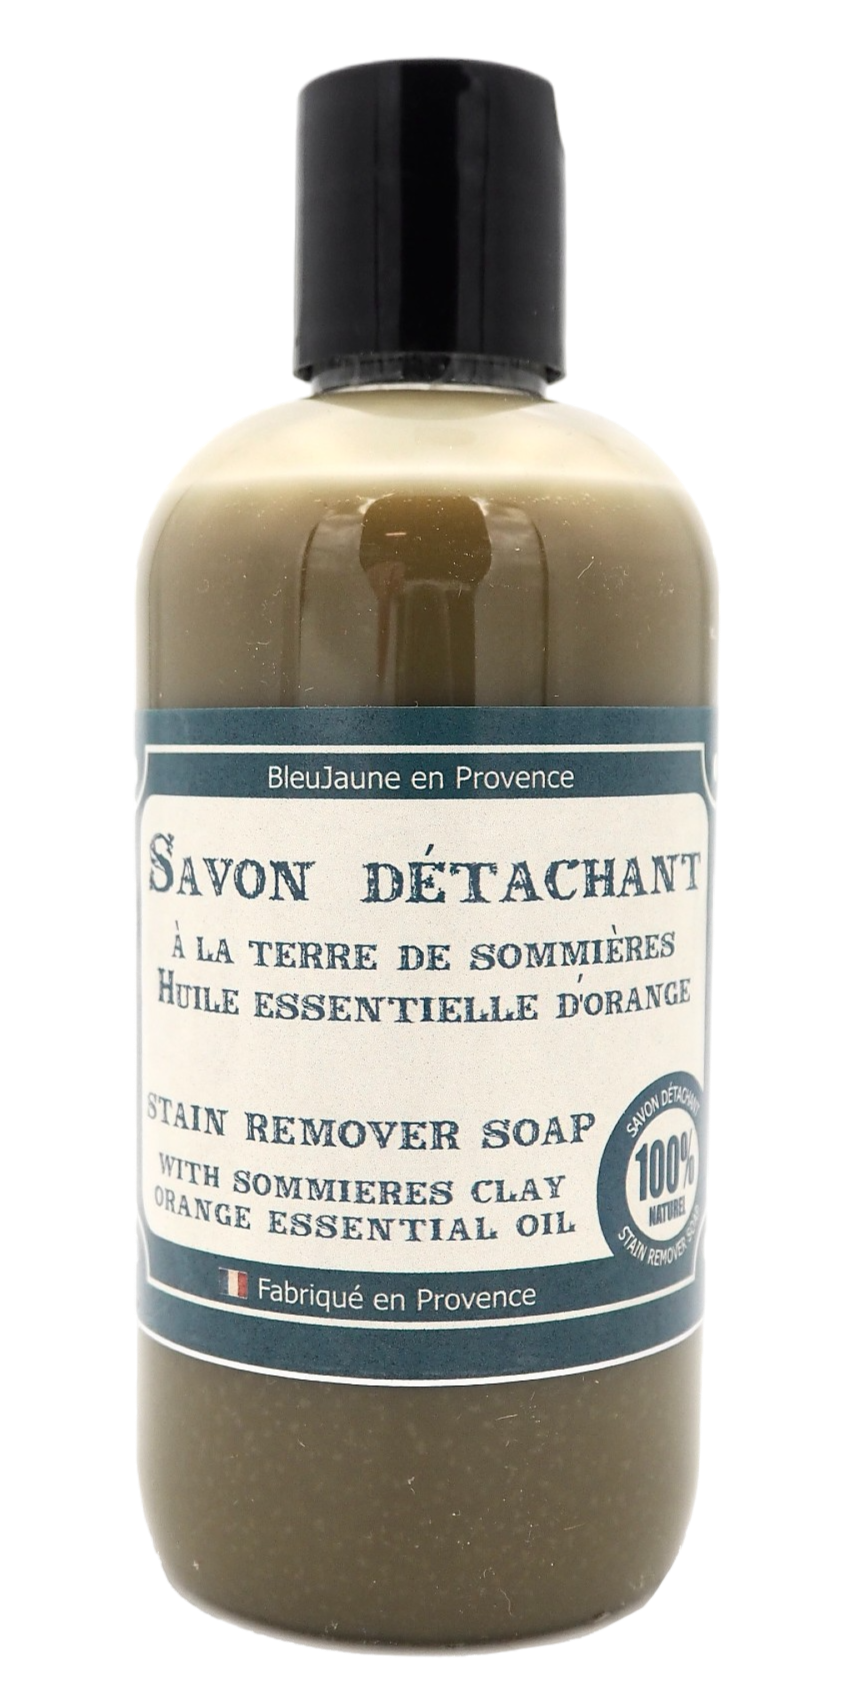 Five great reasons to use Terre de Sommières stain remover!